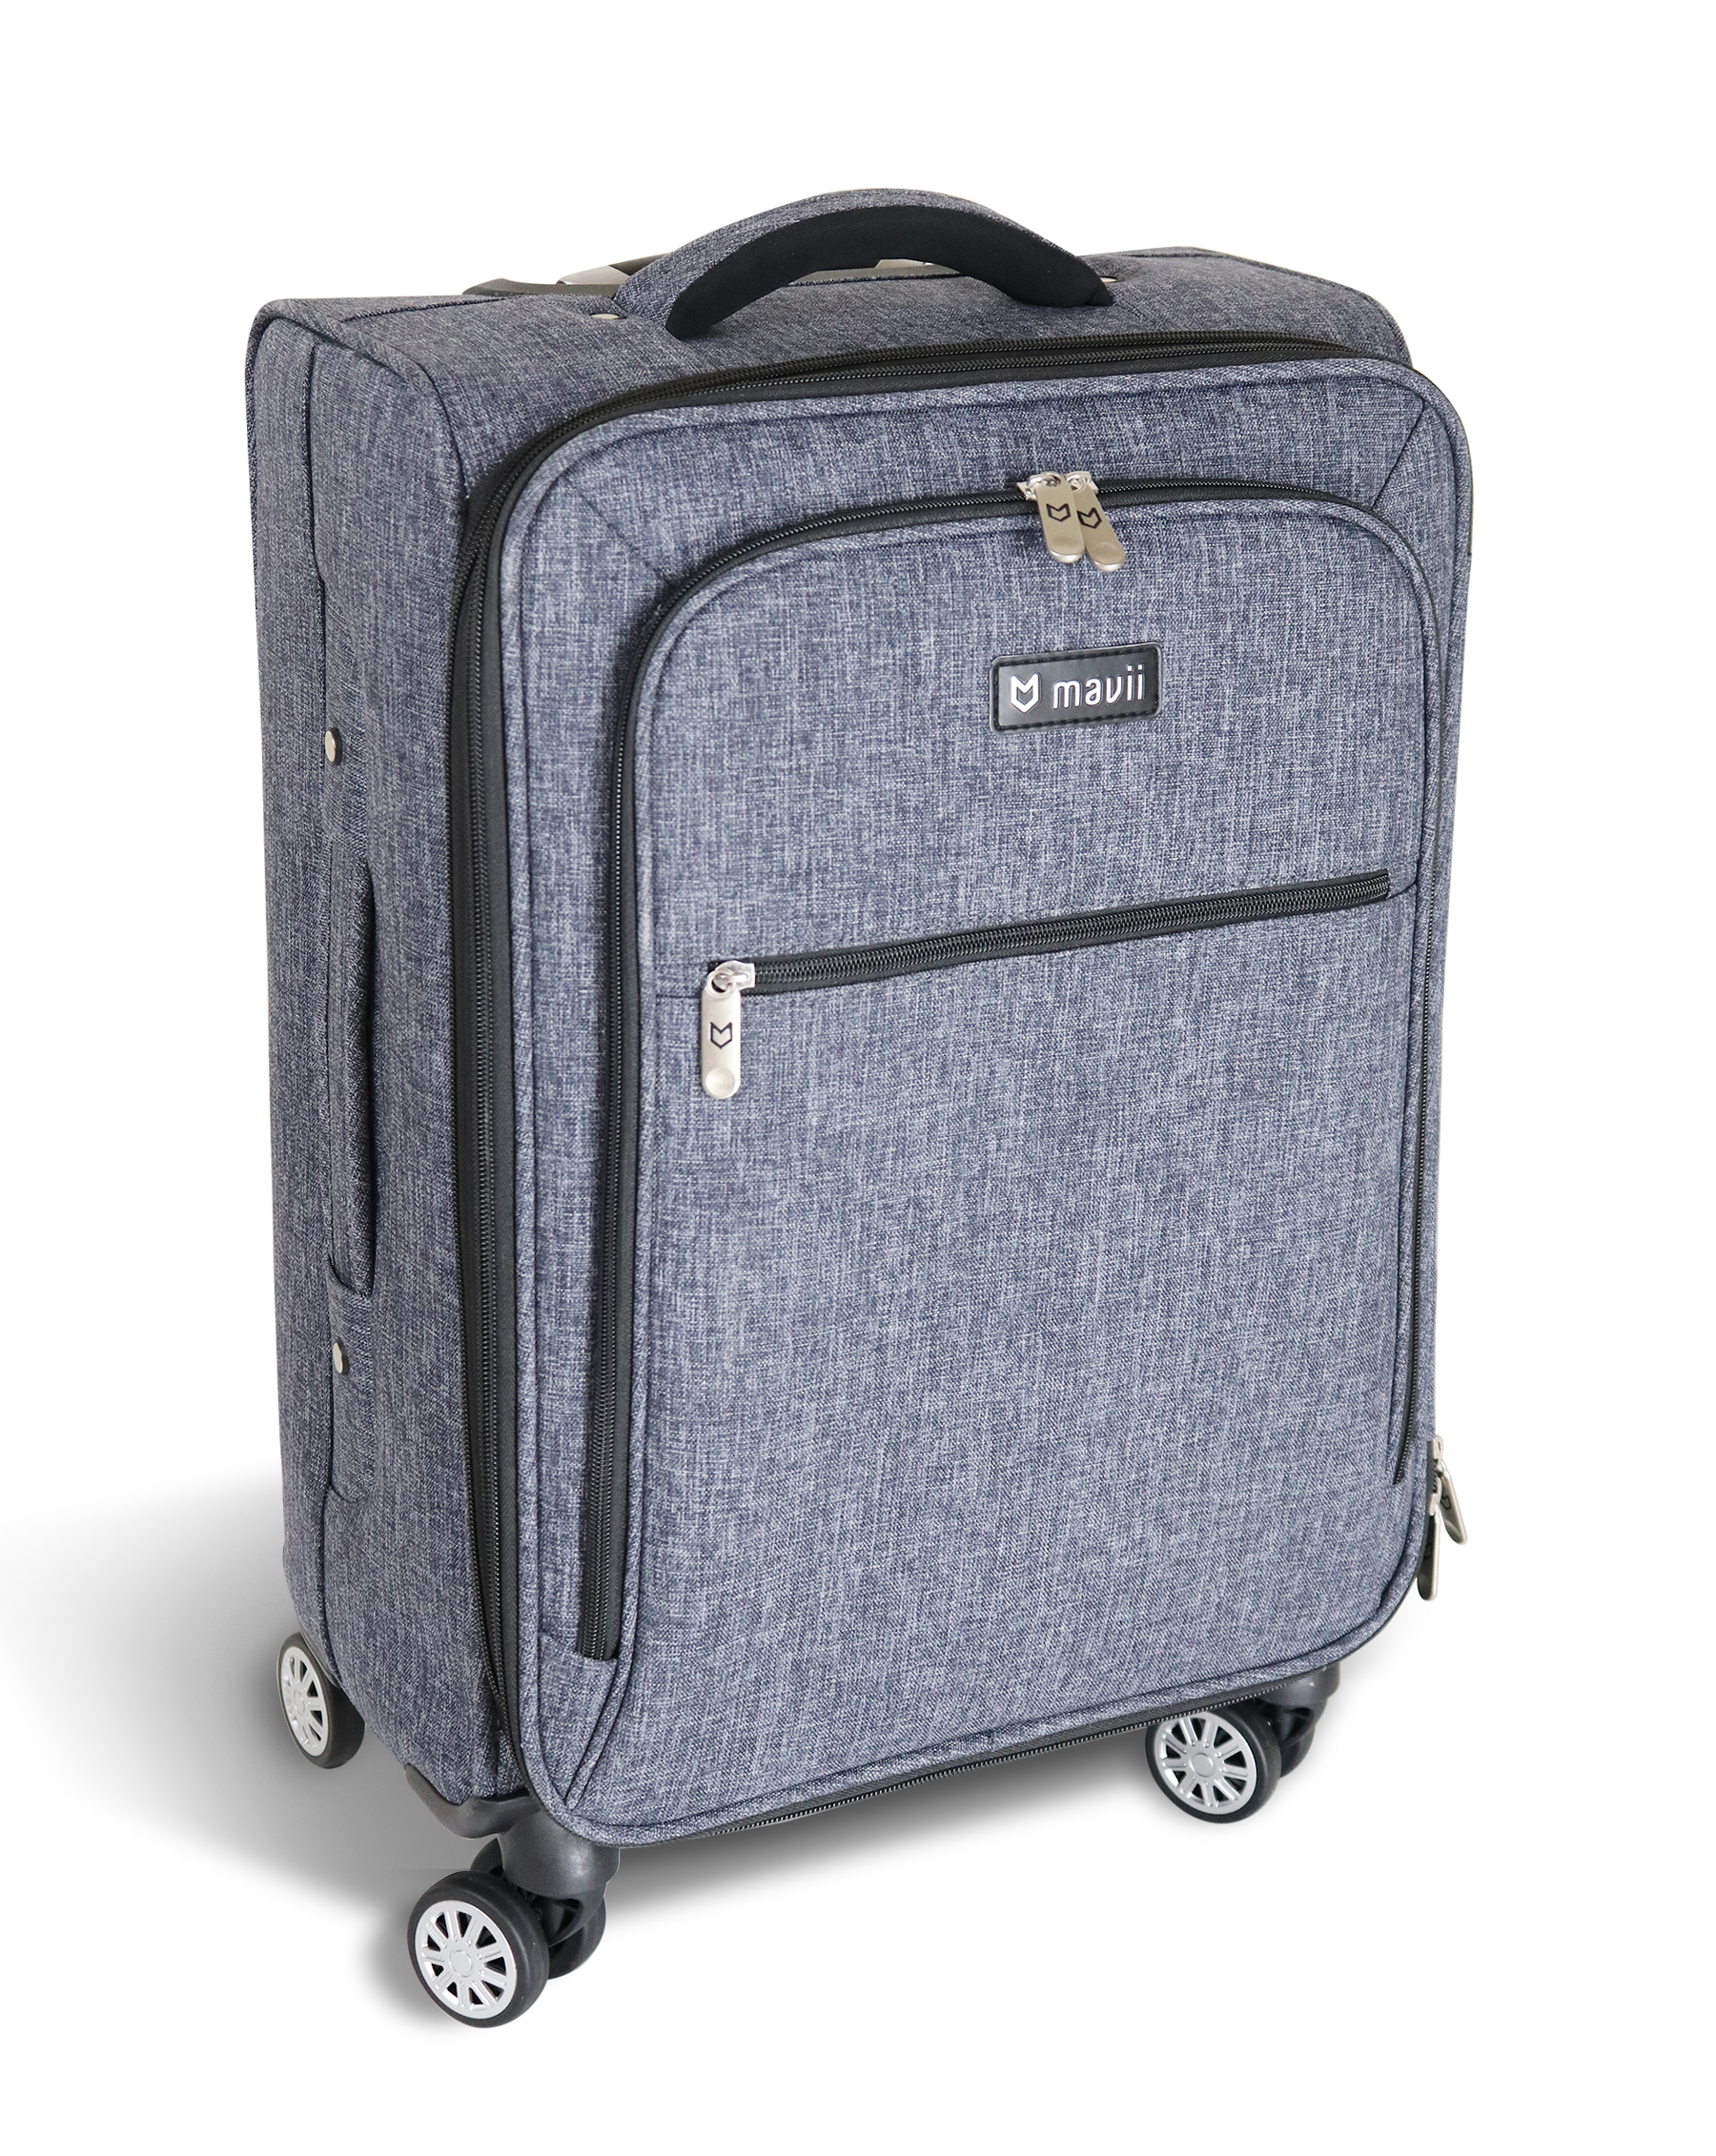 Dfr-1177 Costume Rack Carry-on Luggage With Spinner Wheels, Gray